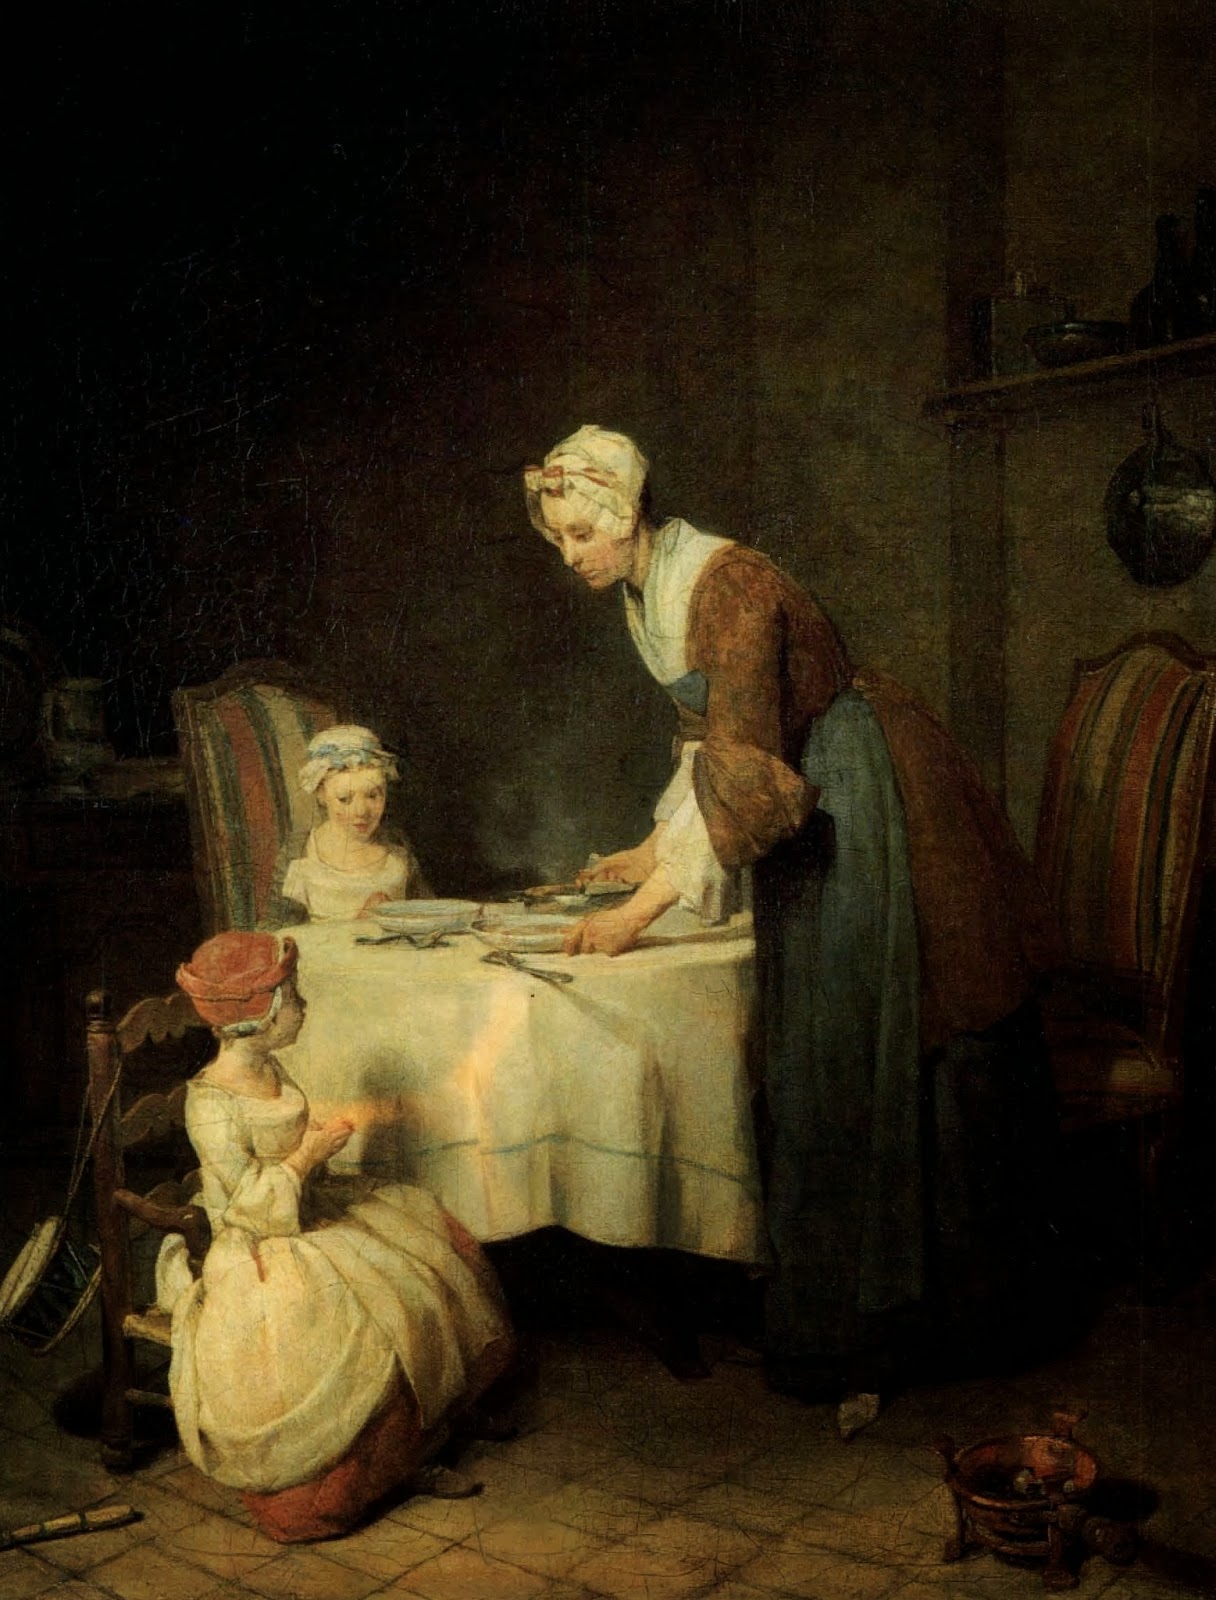 Chardin: Stooping to Conquer